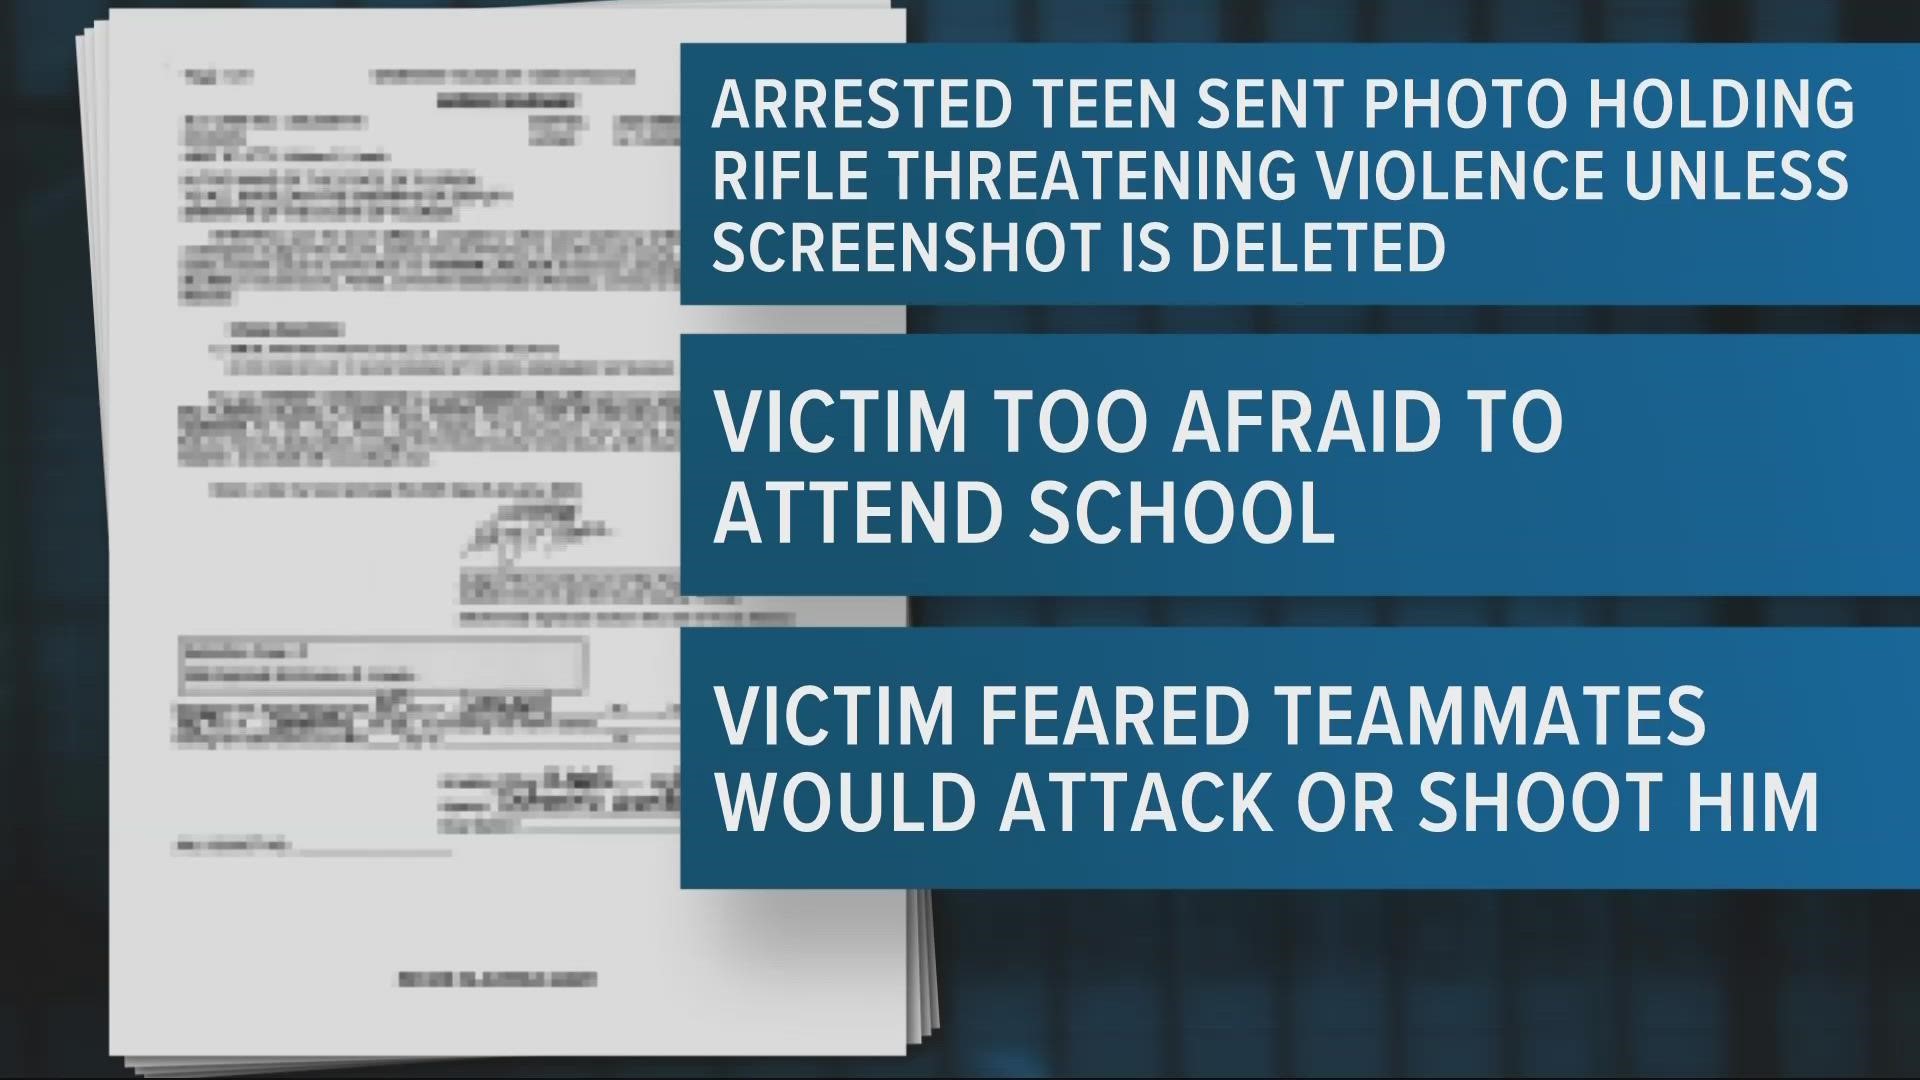 The students were sending threatening, racially charged texts to the only Black player on the team. They were arrested Monday and officials say they were expelled.